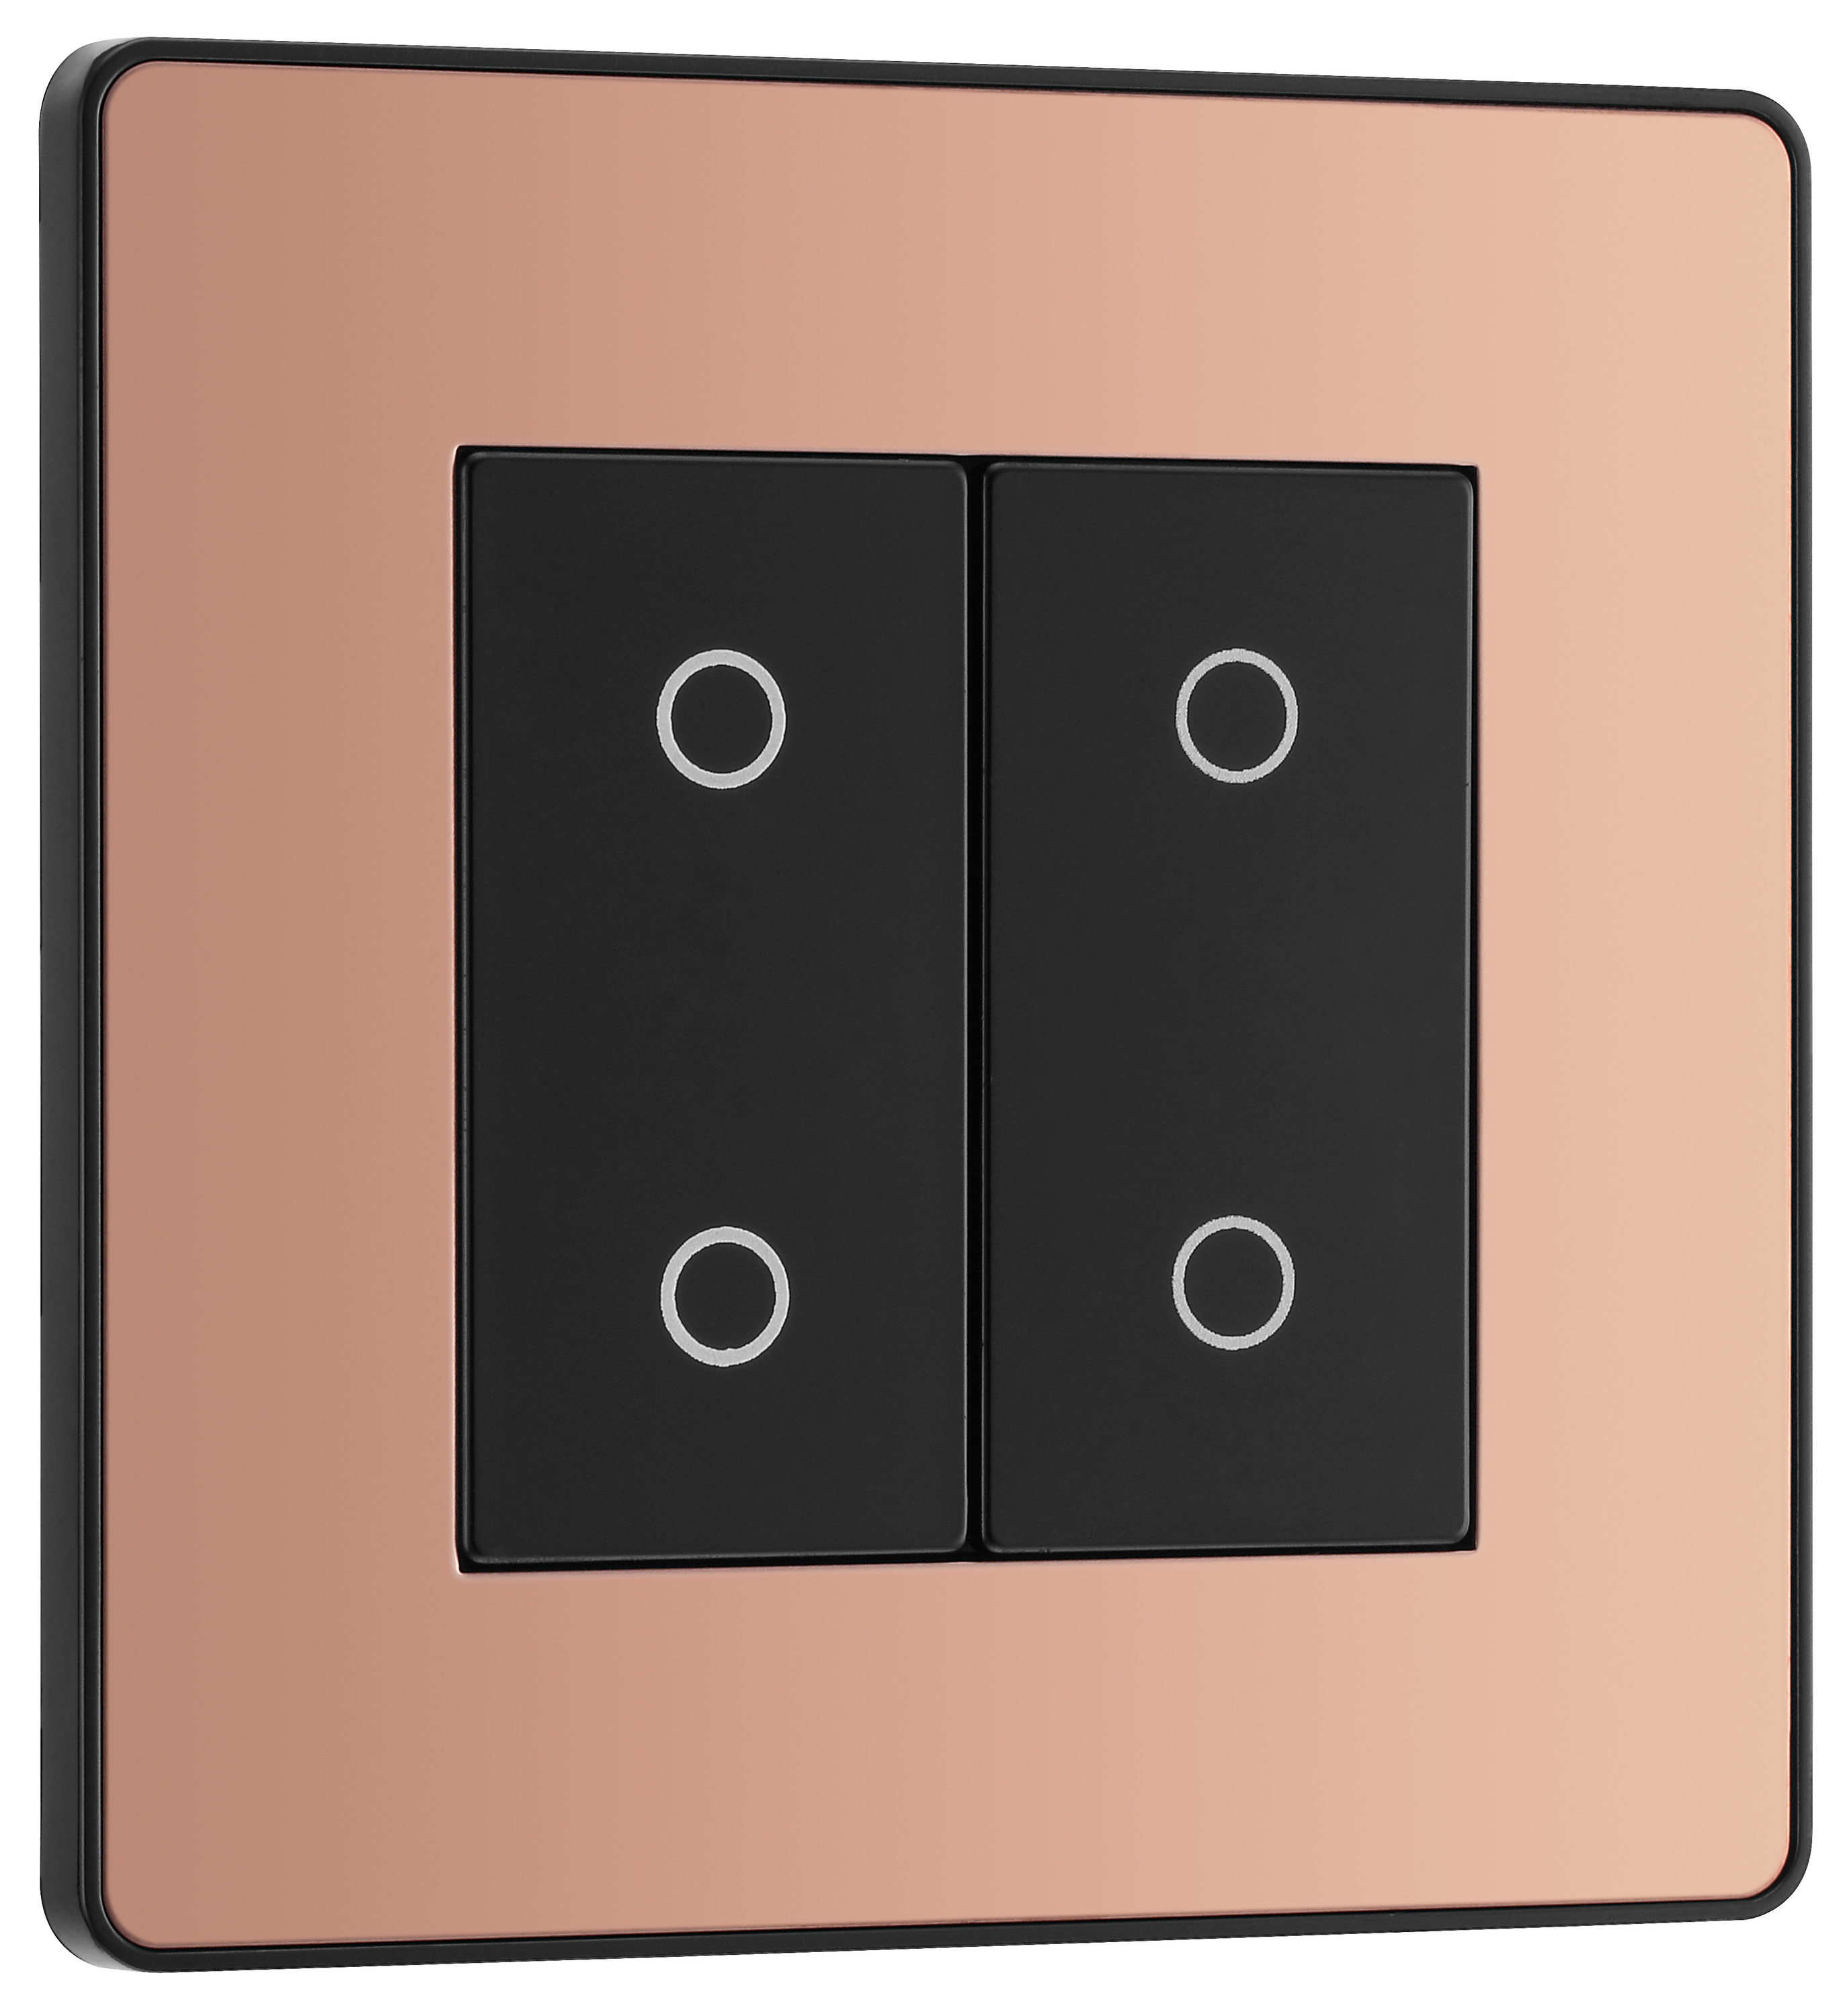 BG Evolve Master Polished Copper 2 Way Double Touch Dimmer Switch - 200W